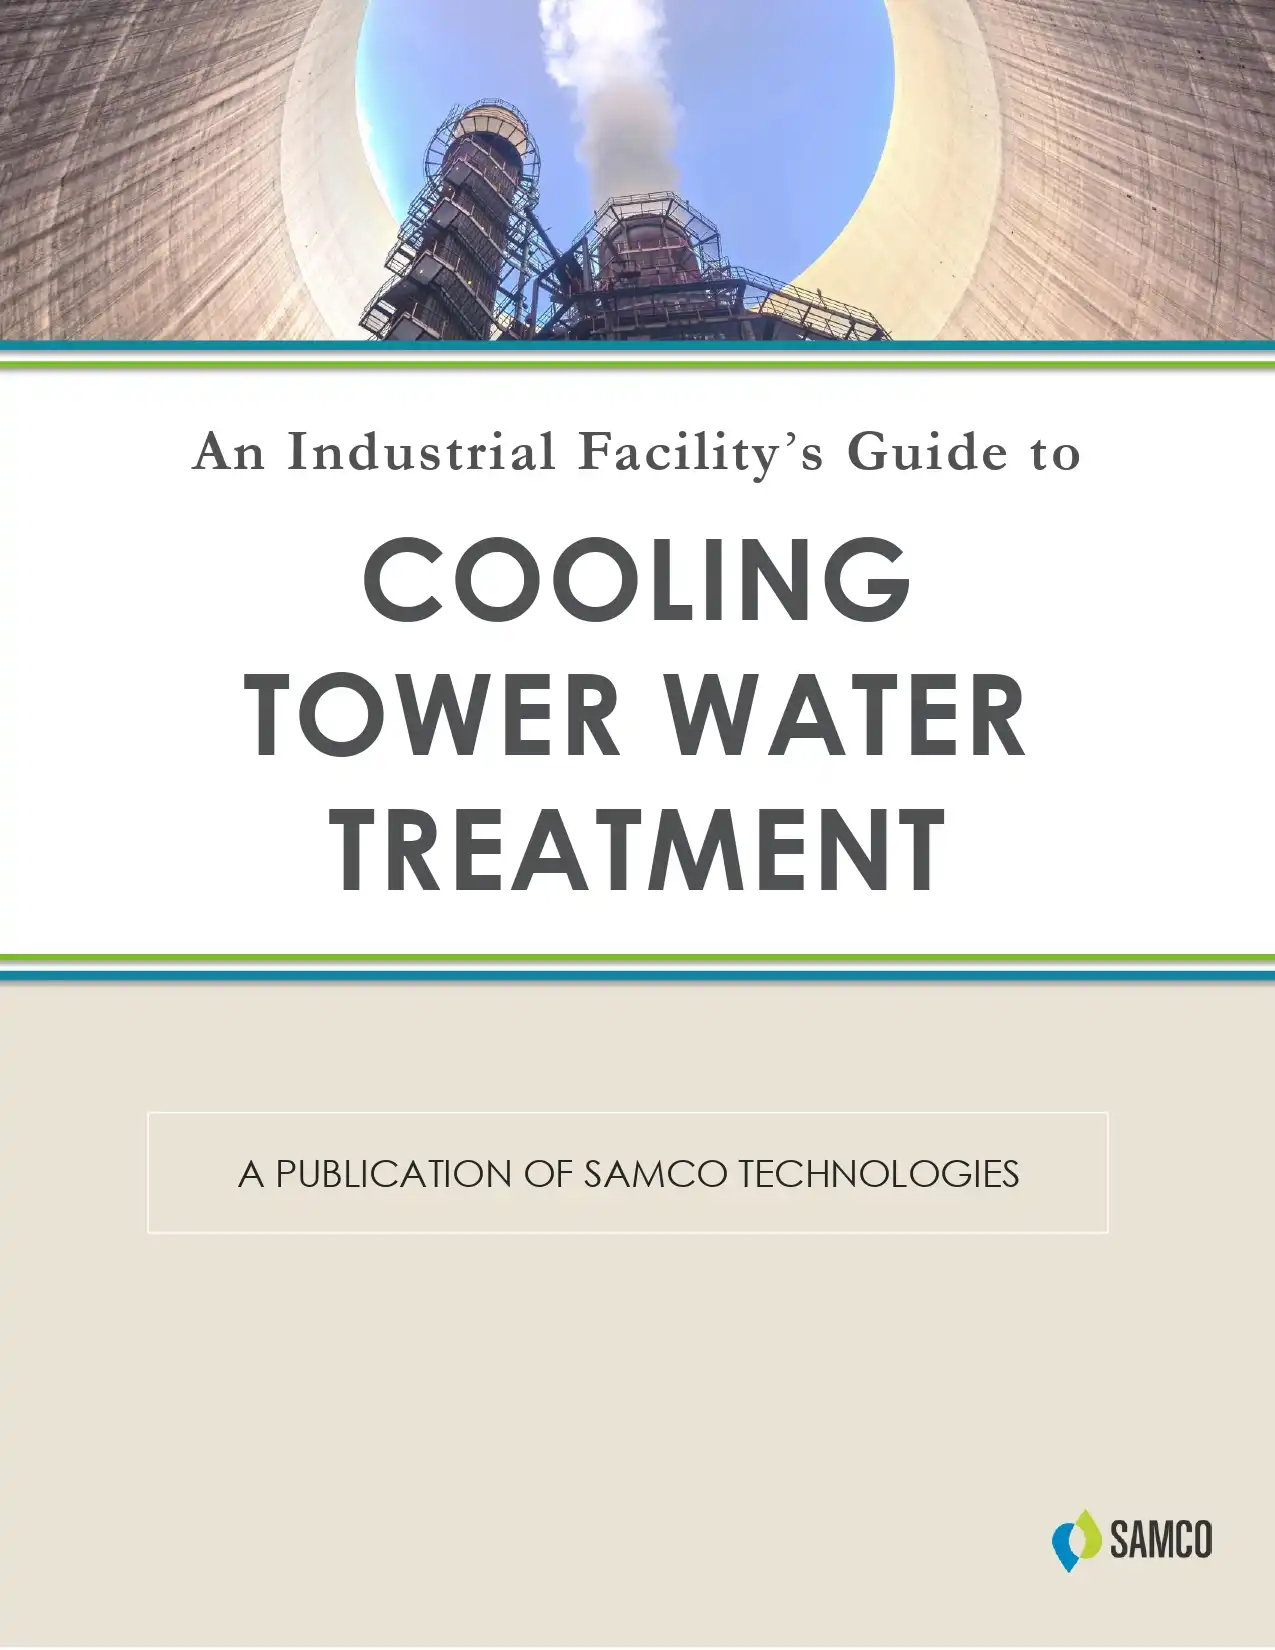 An Industrial Facility’s Guide To Cooling Tower Water Treatment